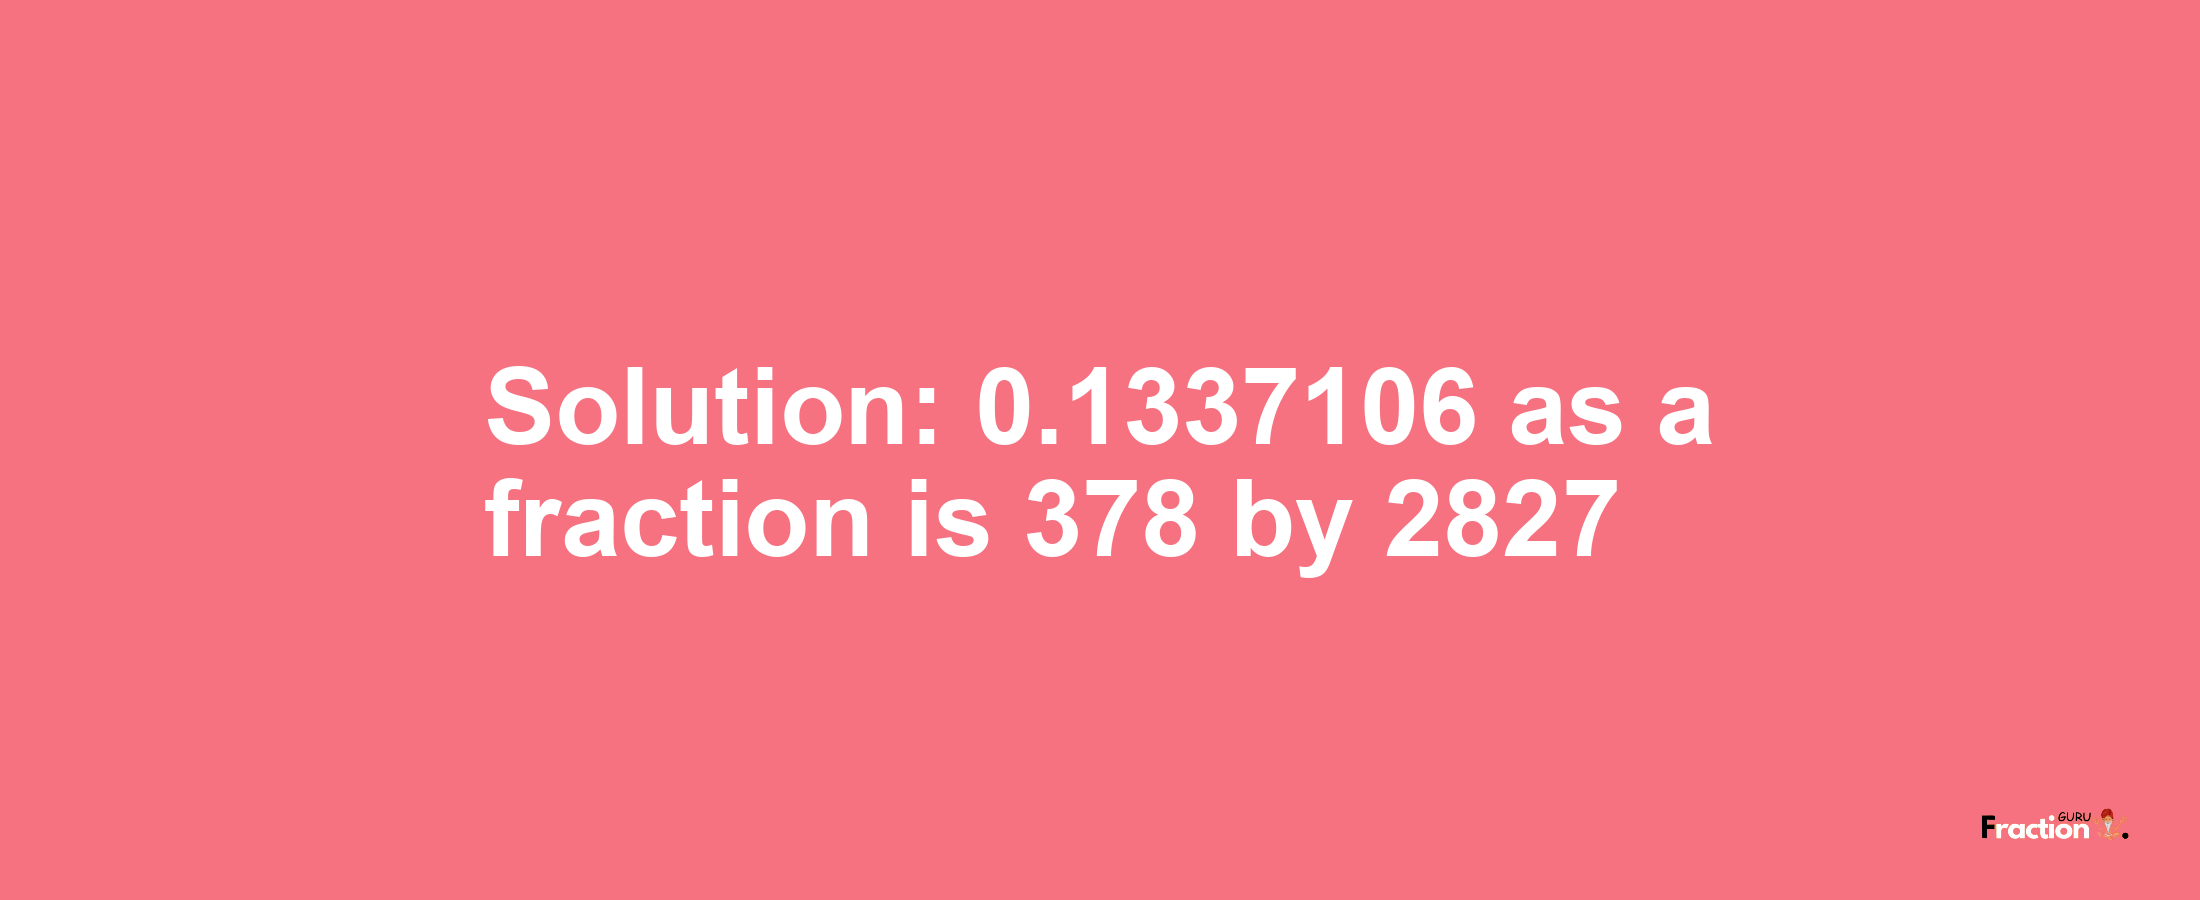 Solution:0.1337106 as a fraction is 378/2827